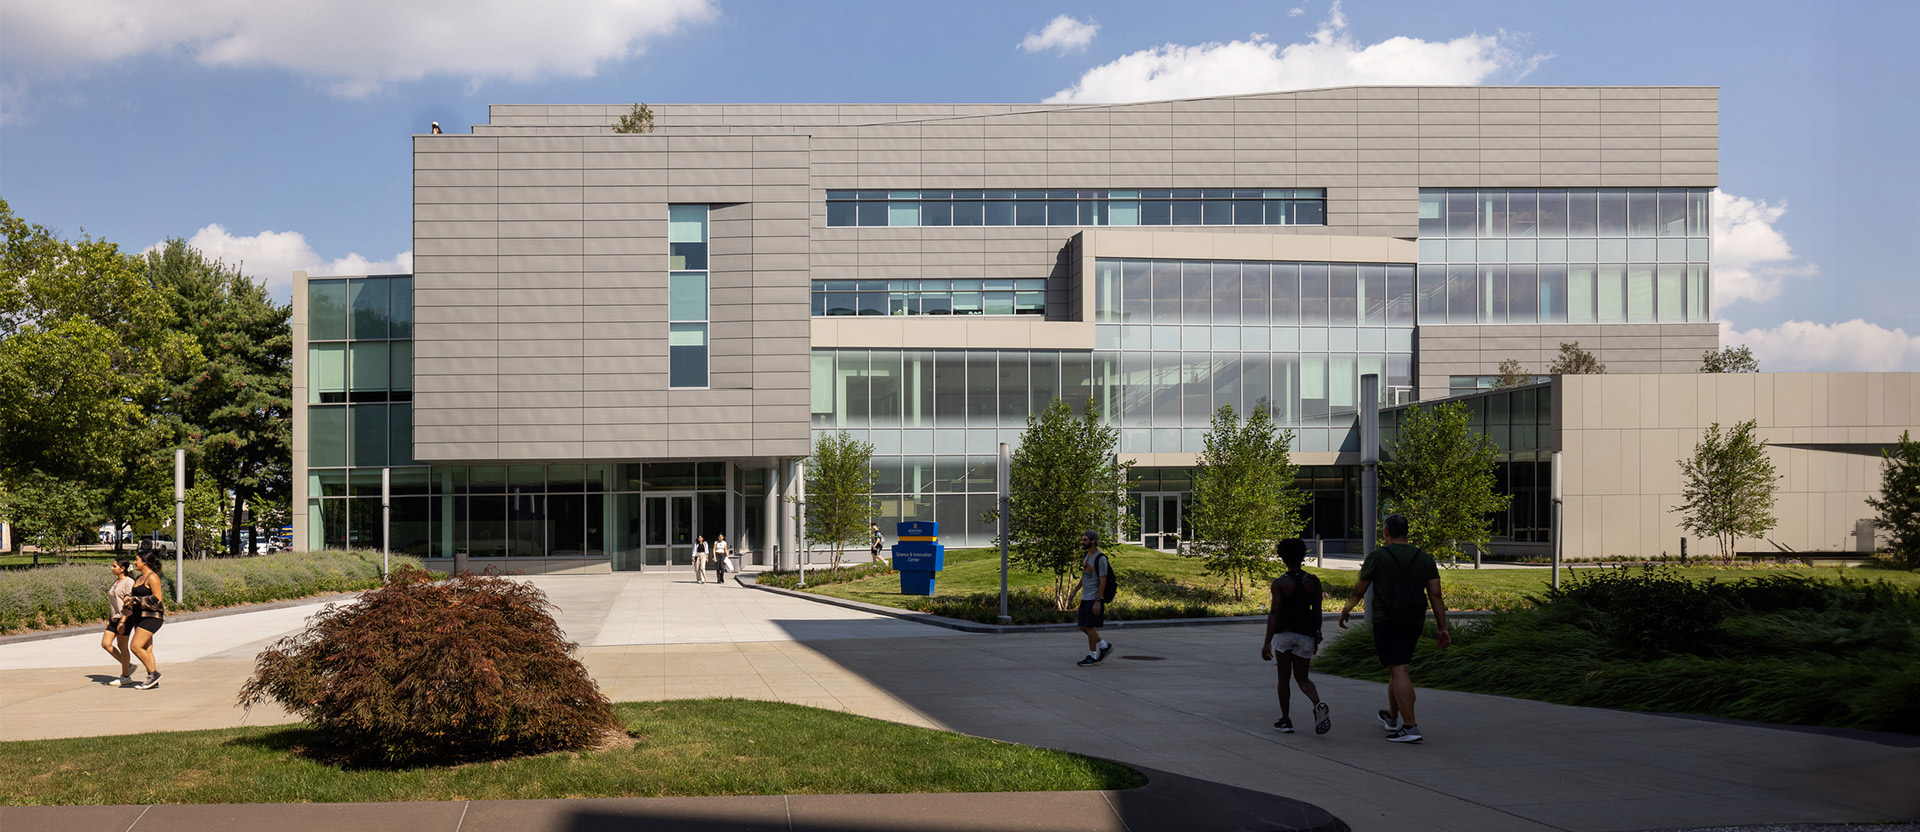 Modern educational building featuring clean lines, expansive glass facade for natural lighting, and aluminum composite panels. Landscaped with young trees and pedestrian pathways, the design encourages student engagement and environmental harmony.